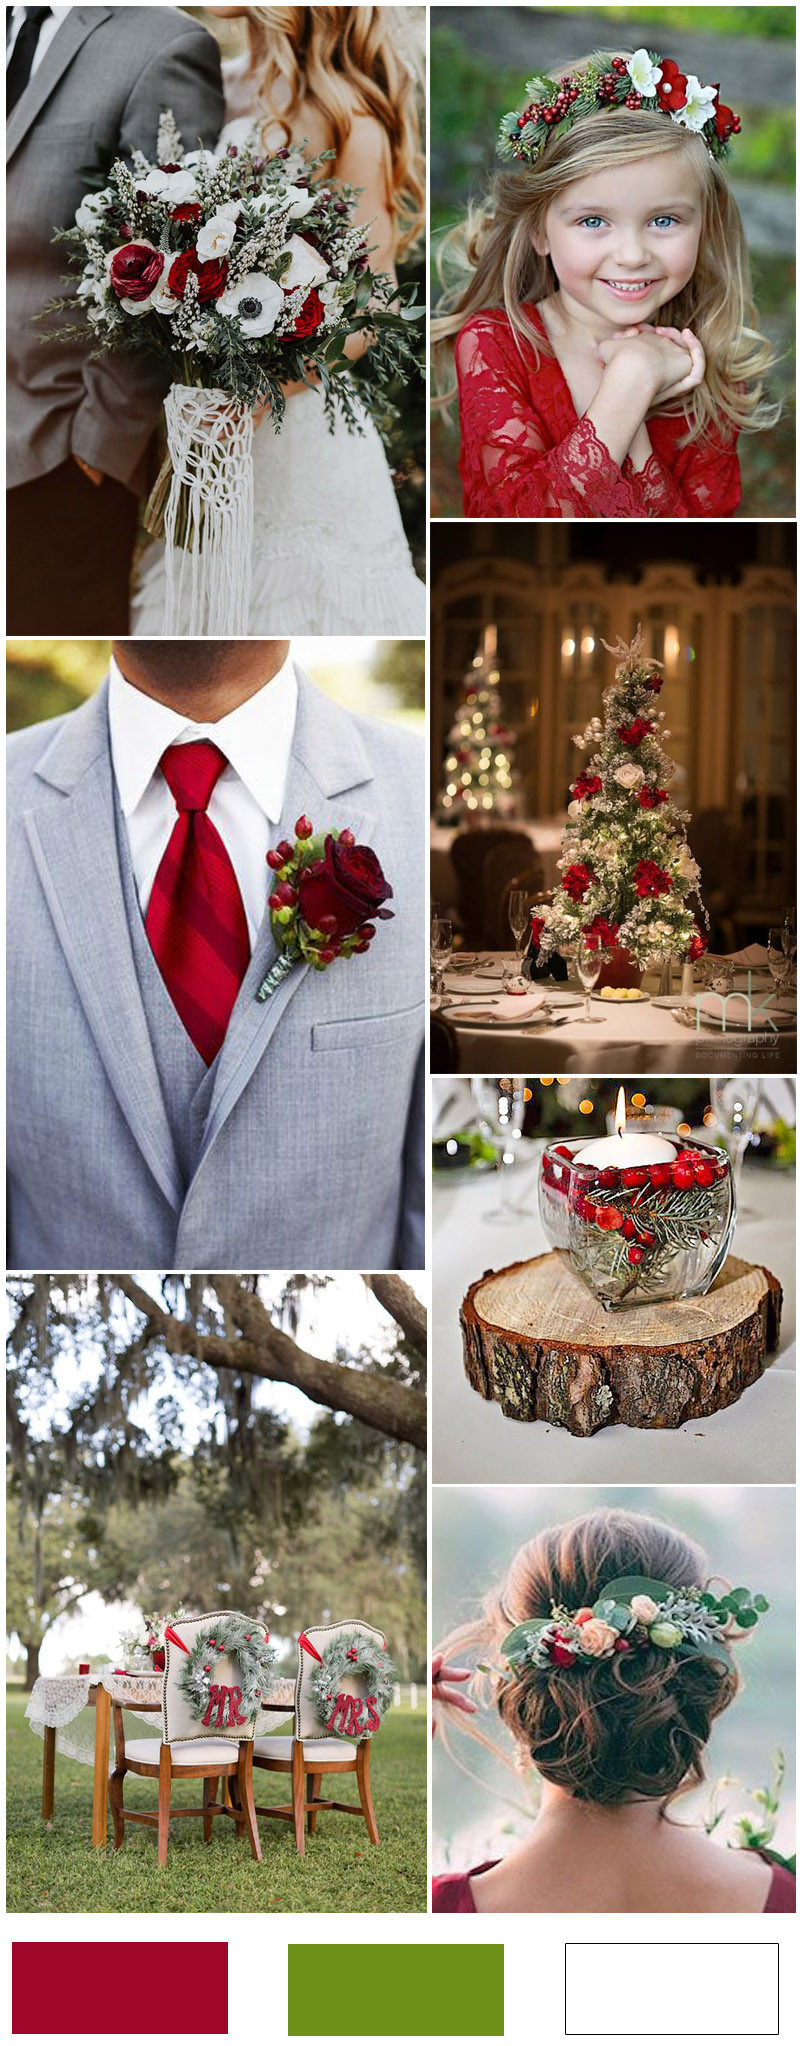 Red Wedding Decorations
 16 Christmas Wedding Ideas You Can’t Miss